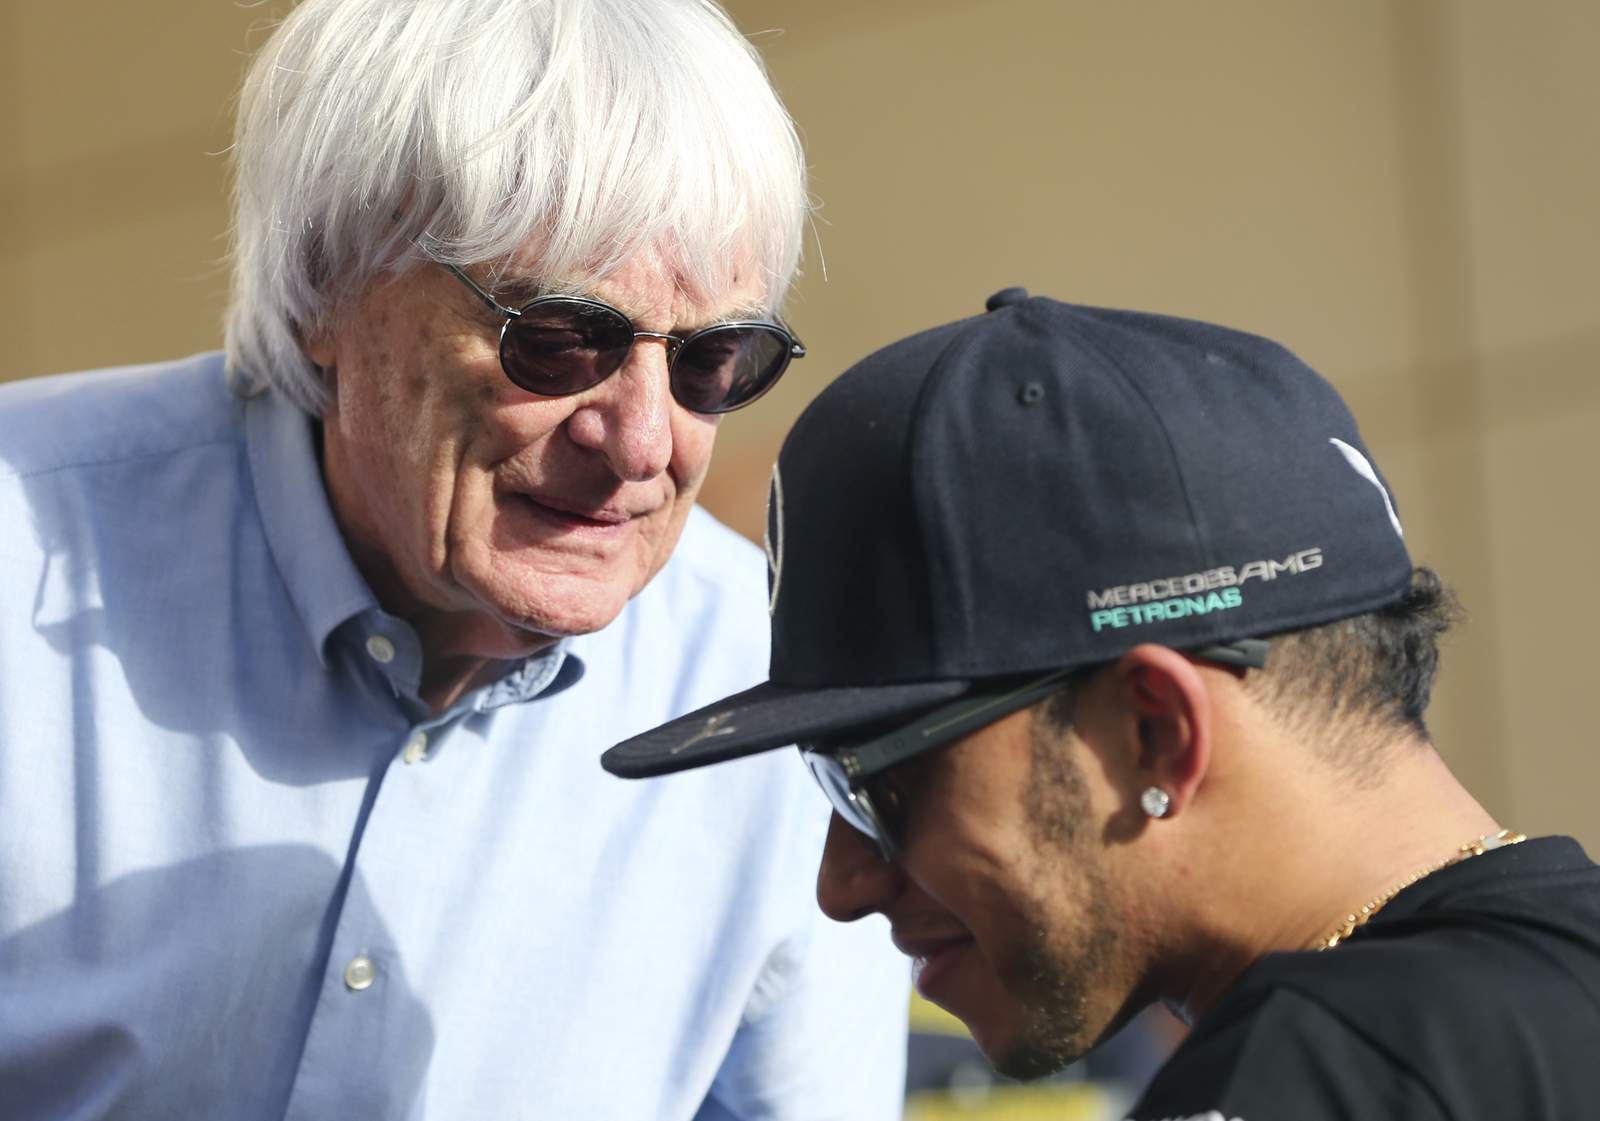 Hamilton saddened and hurt by Ecclestone's racism comments